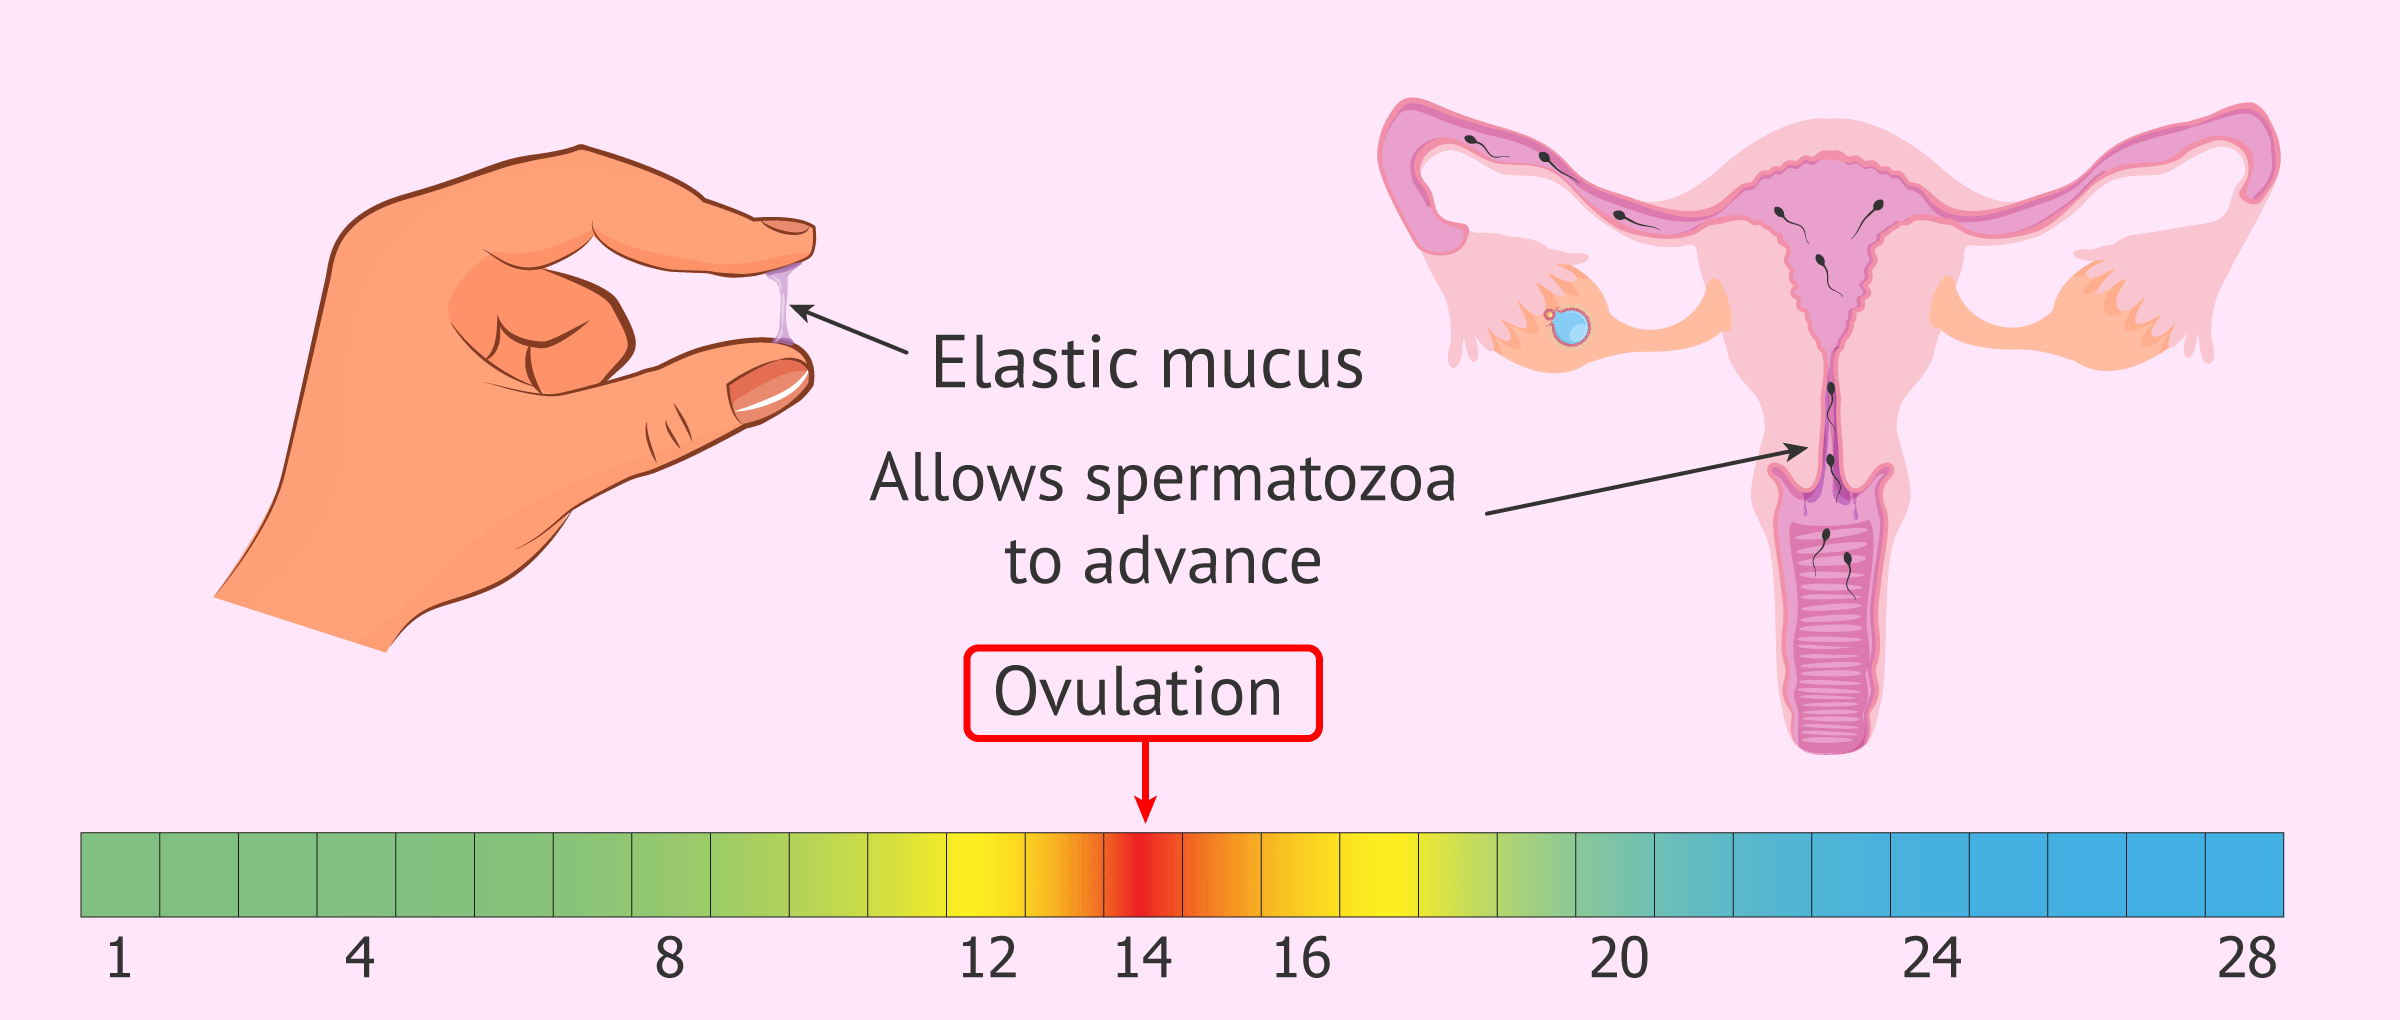 Appearance of the cervical mucus during ovulation